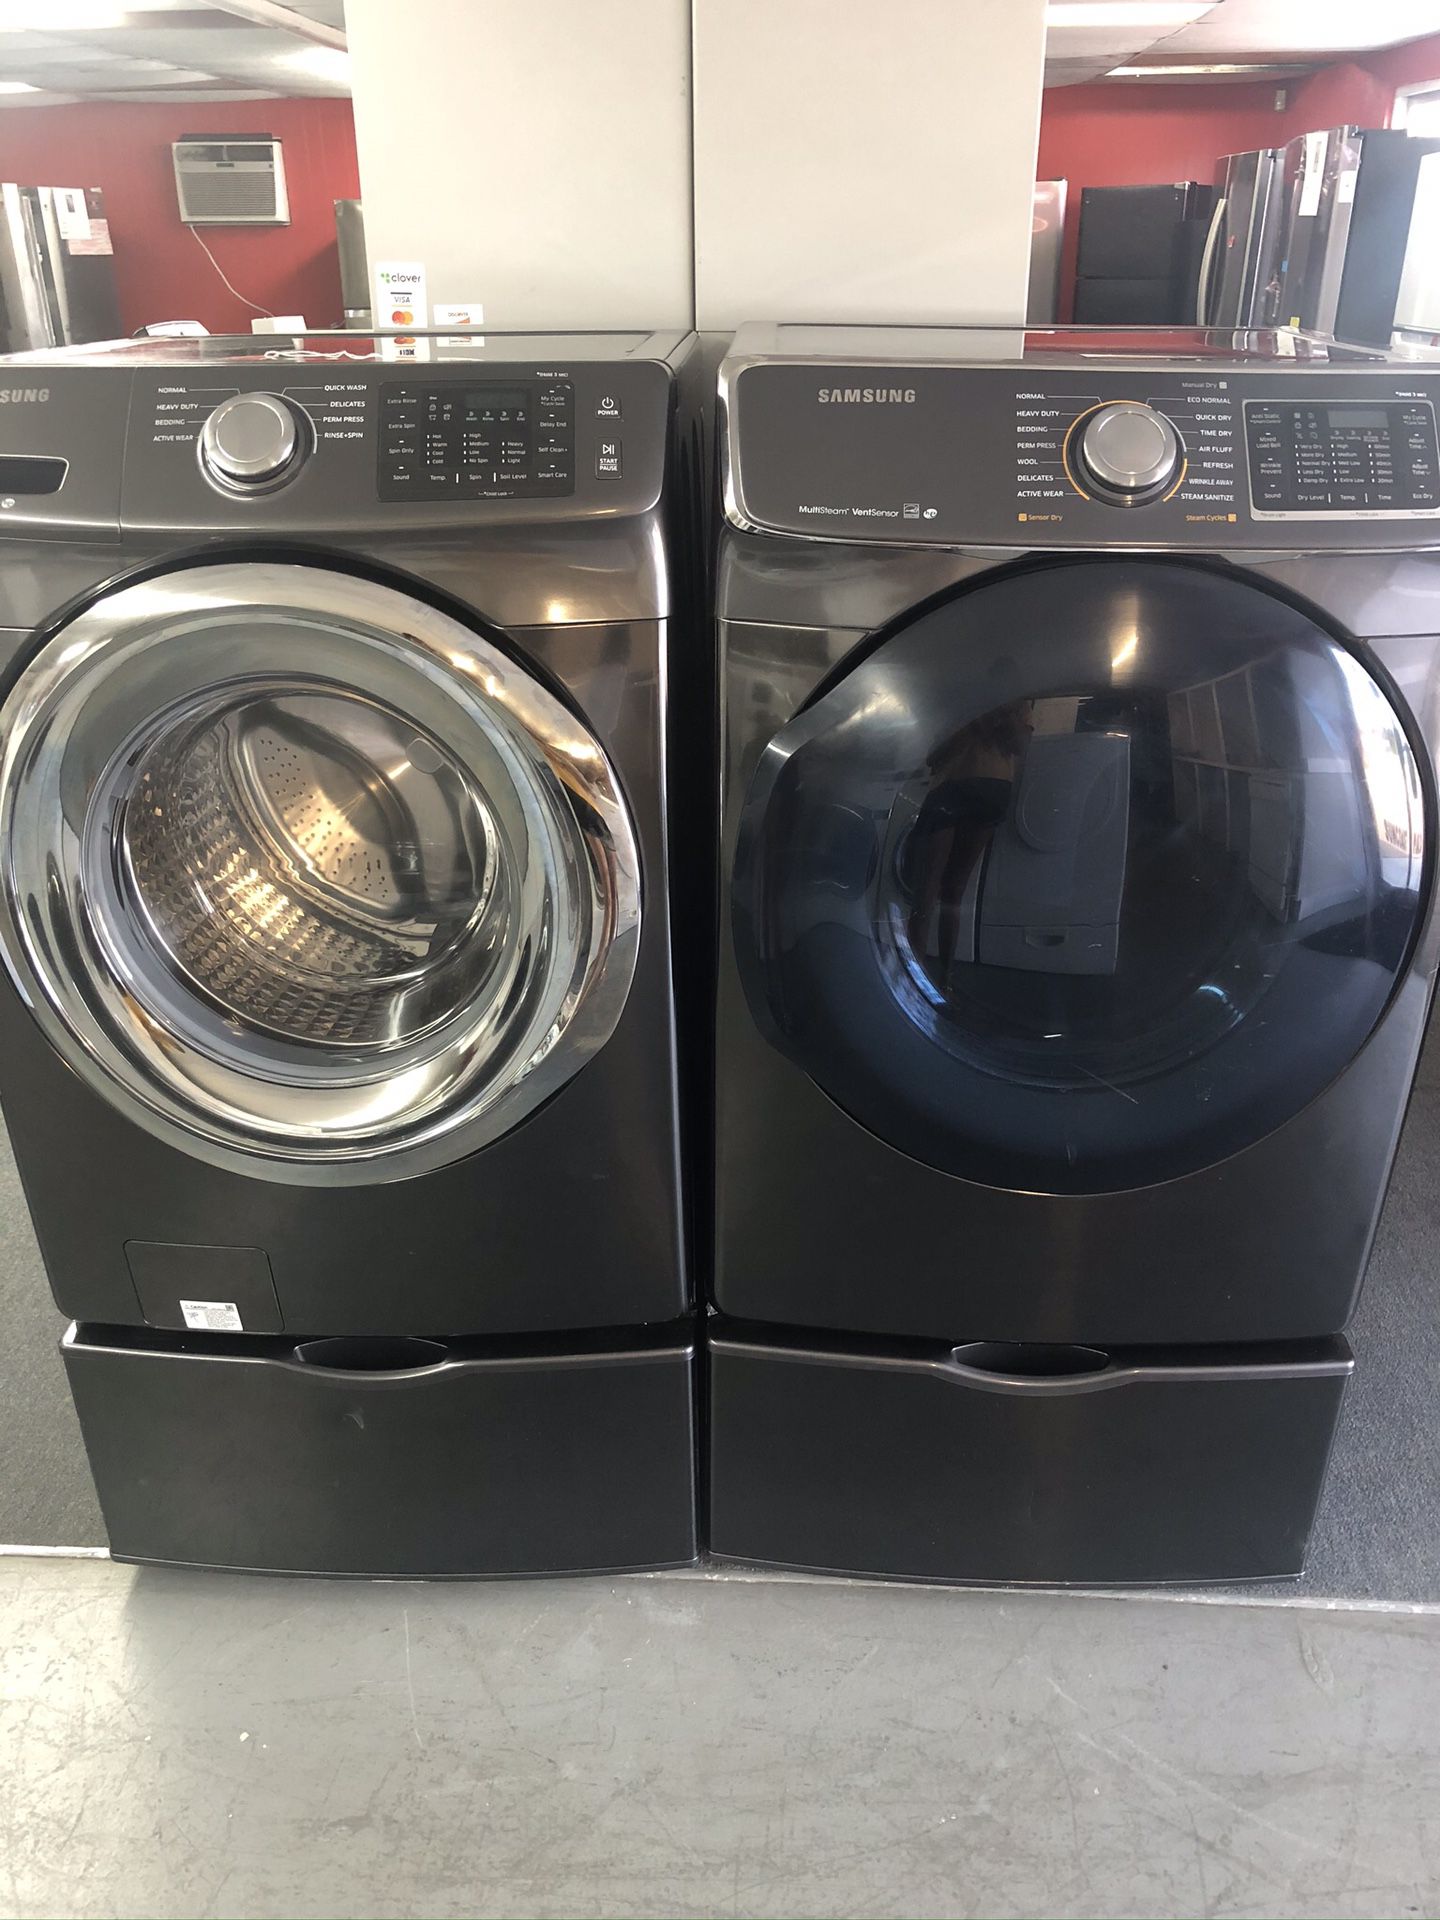 Used Samsung high efficiency front load washer and dryer set. 1 year warranty